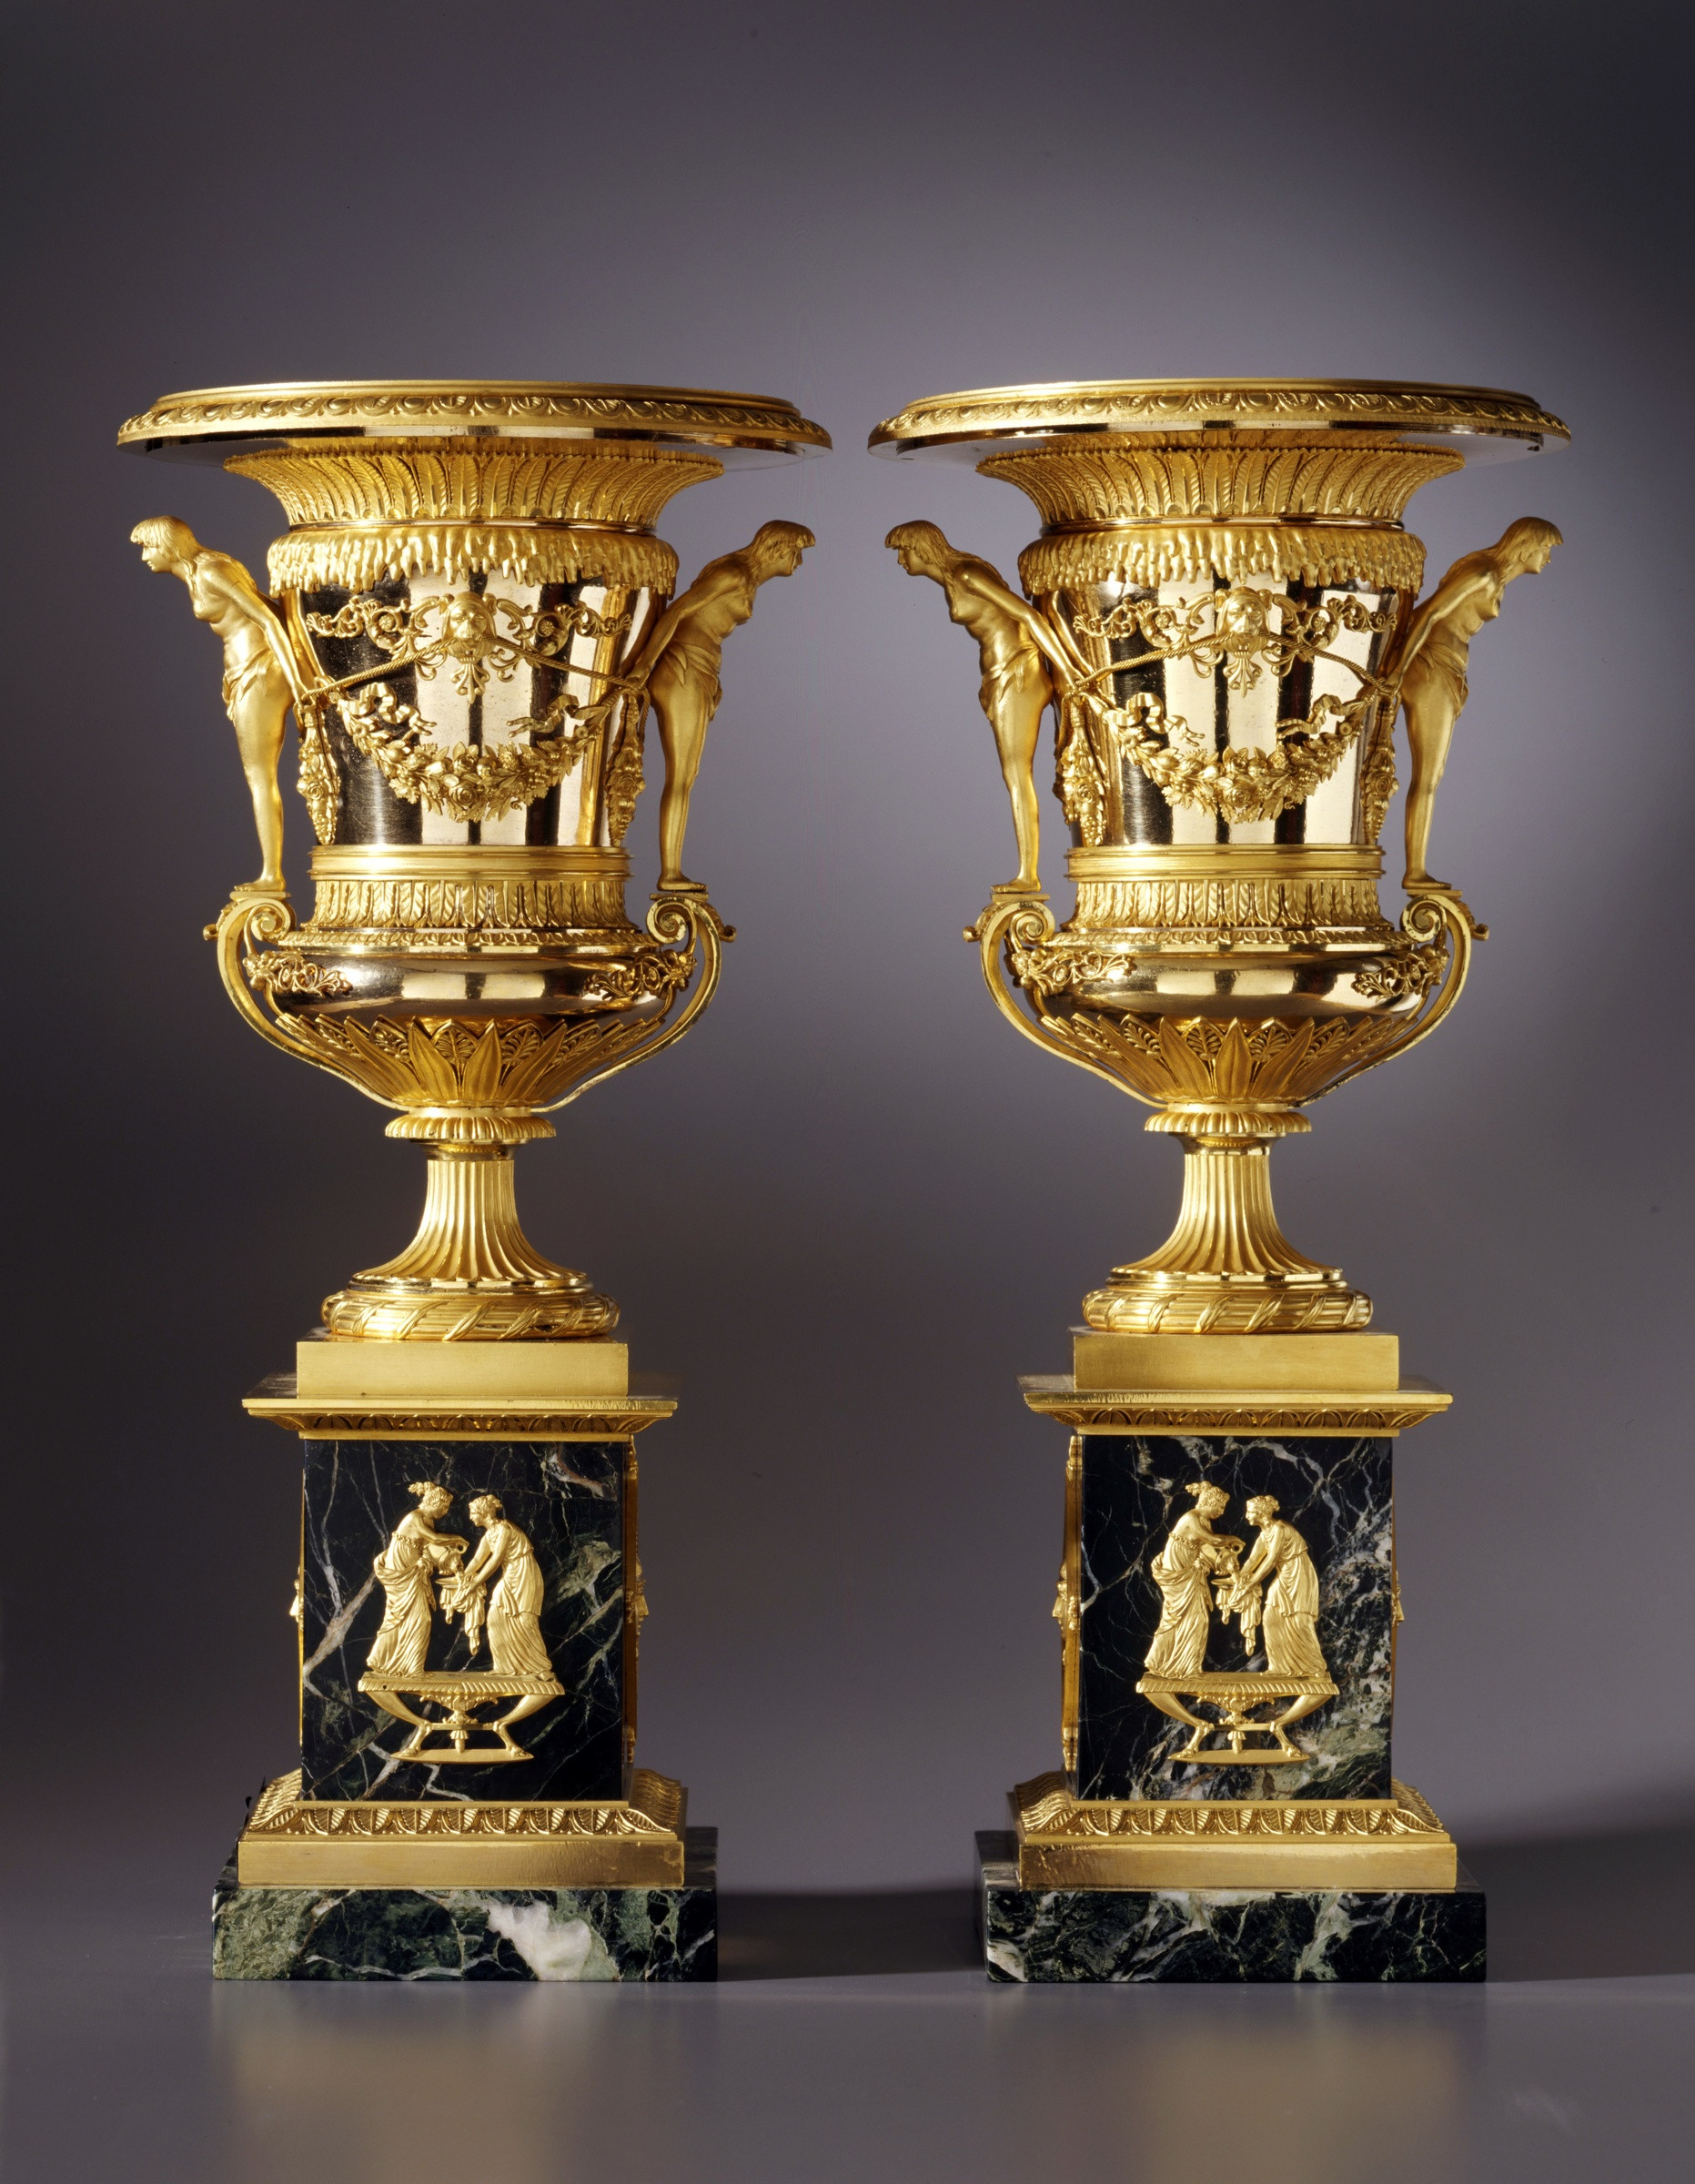 16 Perfect Glass Vase with Handle 2024 free download glass vase with handle of friedrich bergenfeldt attributed to a pair of large sized st for a pair of large sized st petersburg empire vases attributed to friedrich bergenfeldt